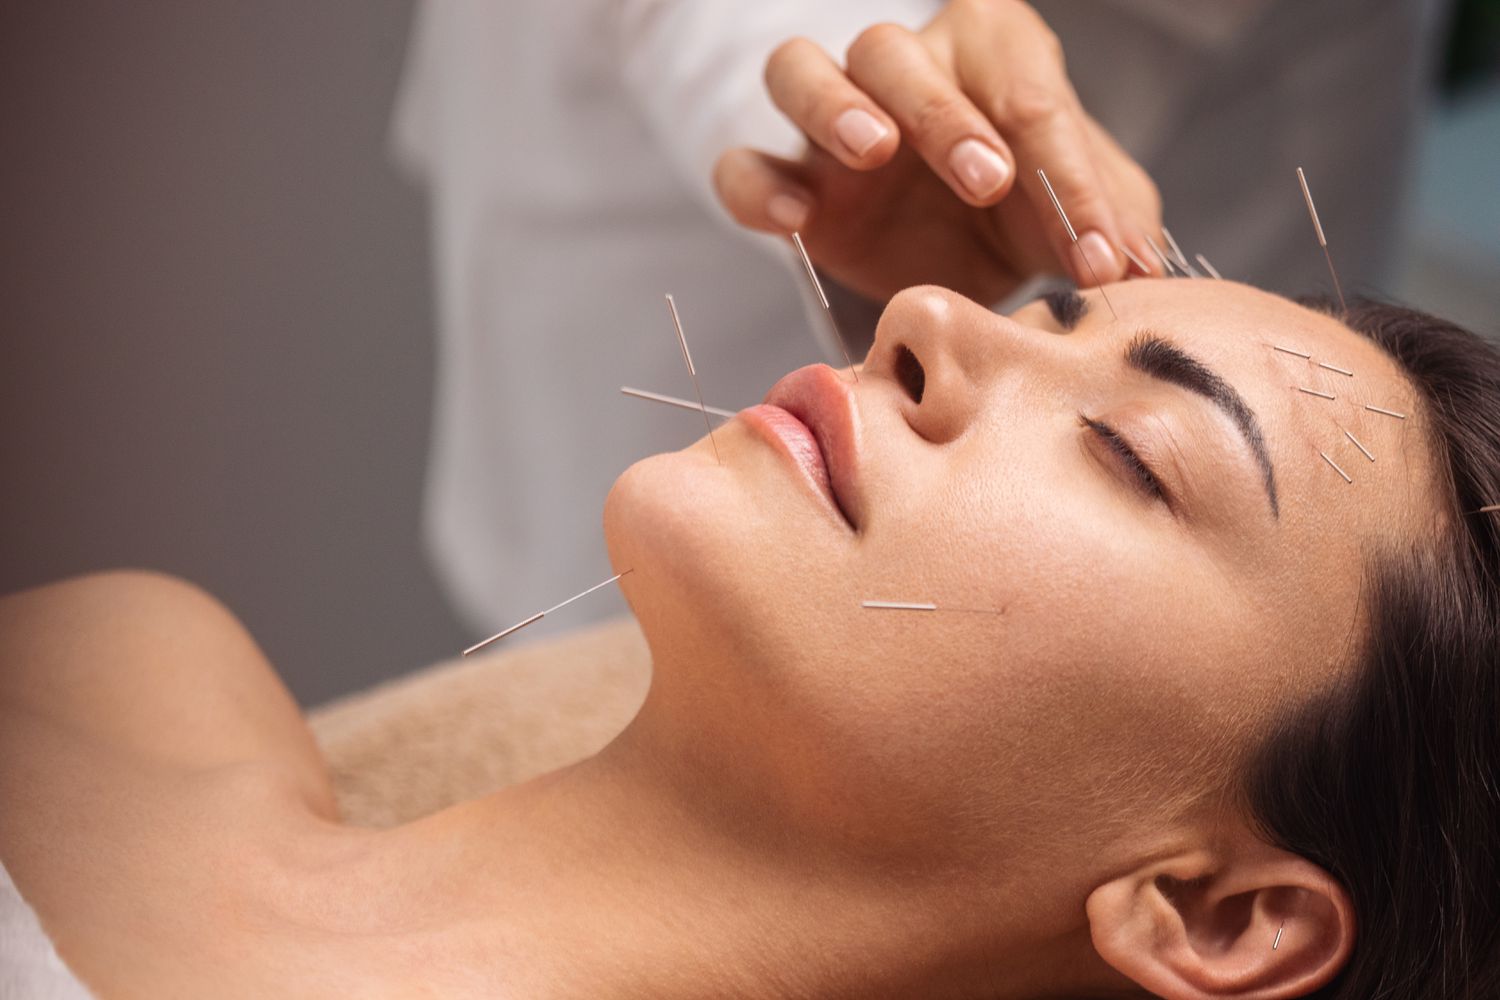 facial rejuvenation cosmetic acupuncture treat fine lines and wrinkles increase collagen production naturally